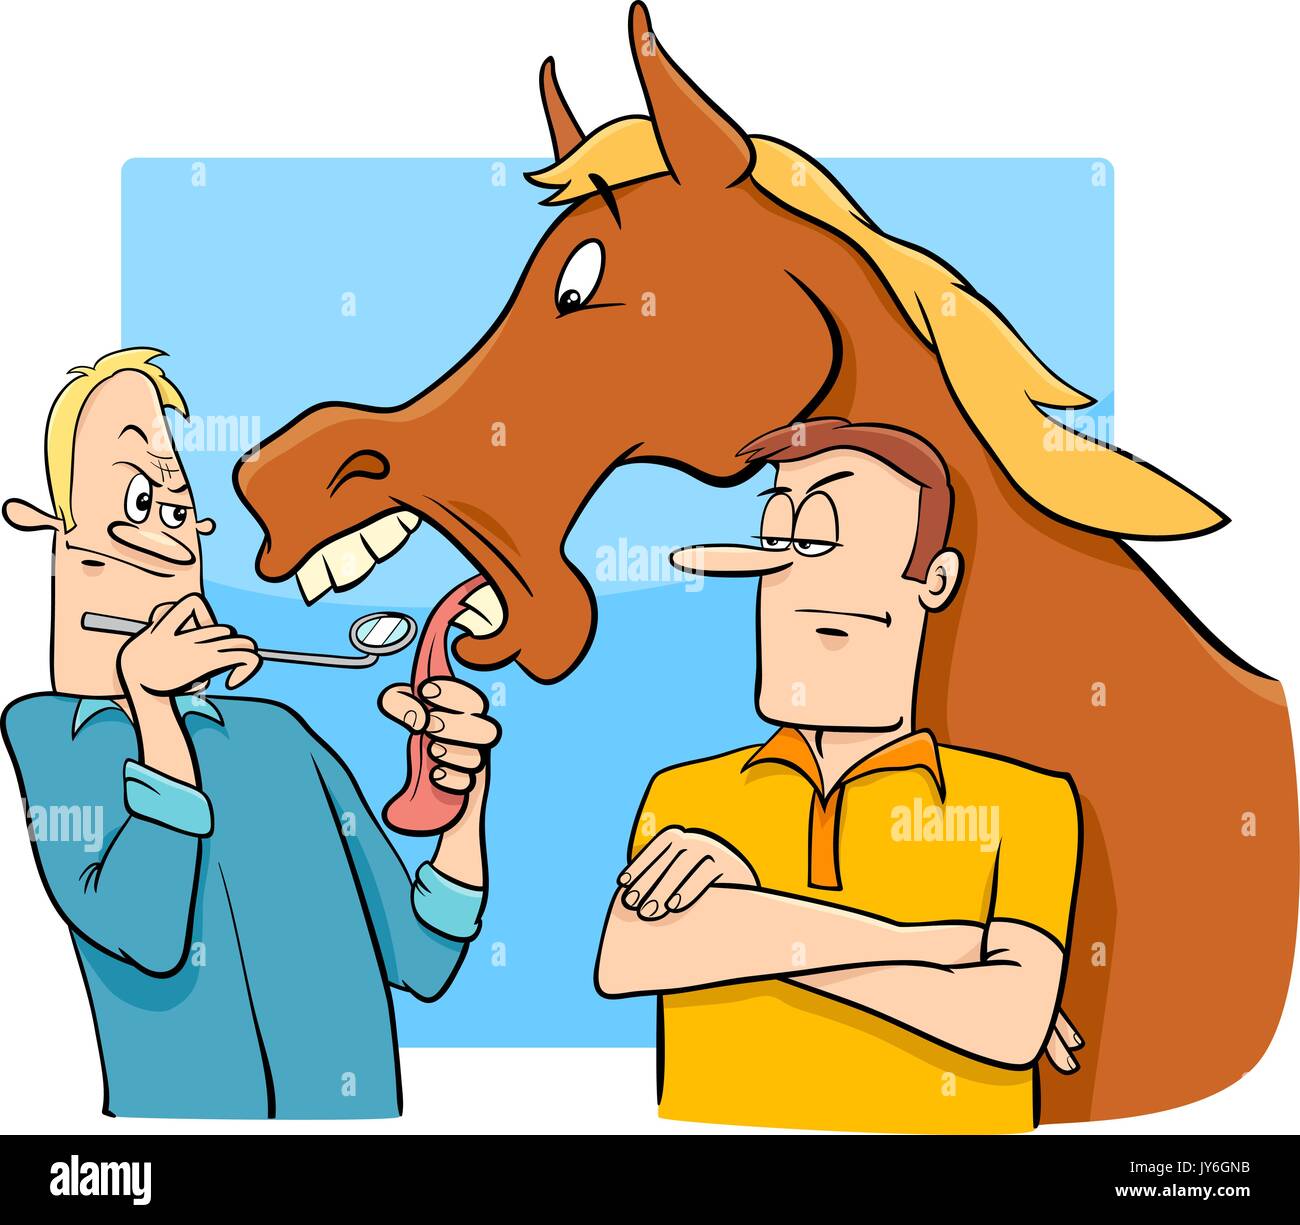 Cartoon Humorous Concept Illustration of Looking a Gift Horse in the Mouth Saying or Proverb Stock Vector